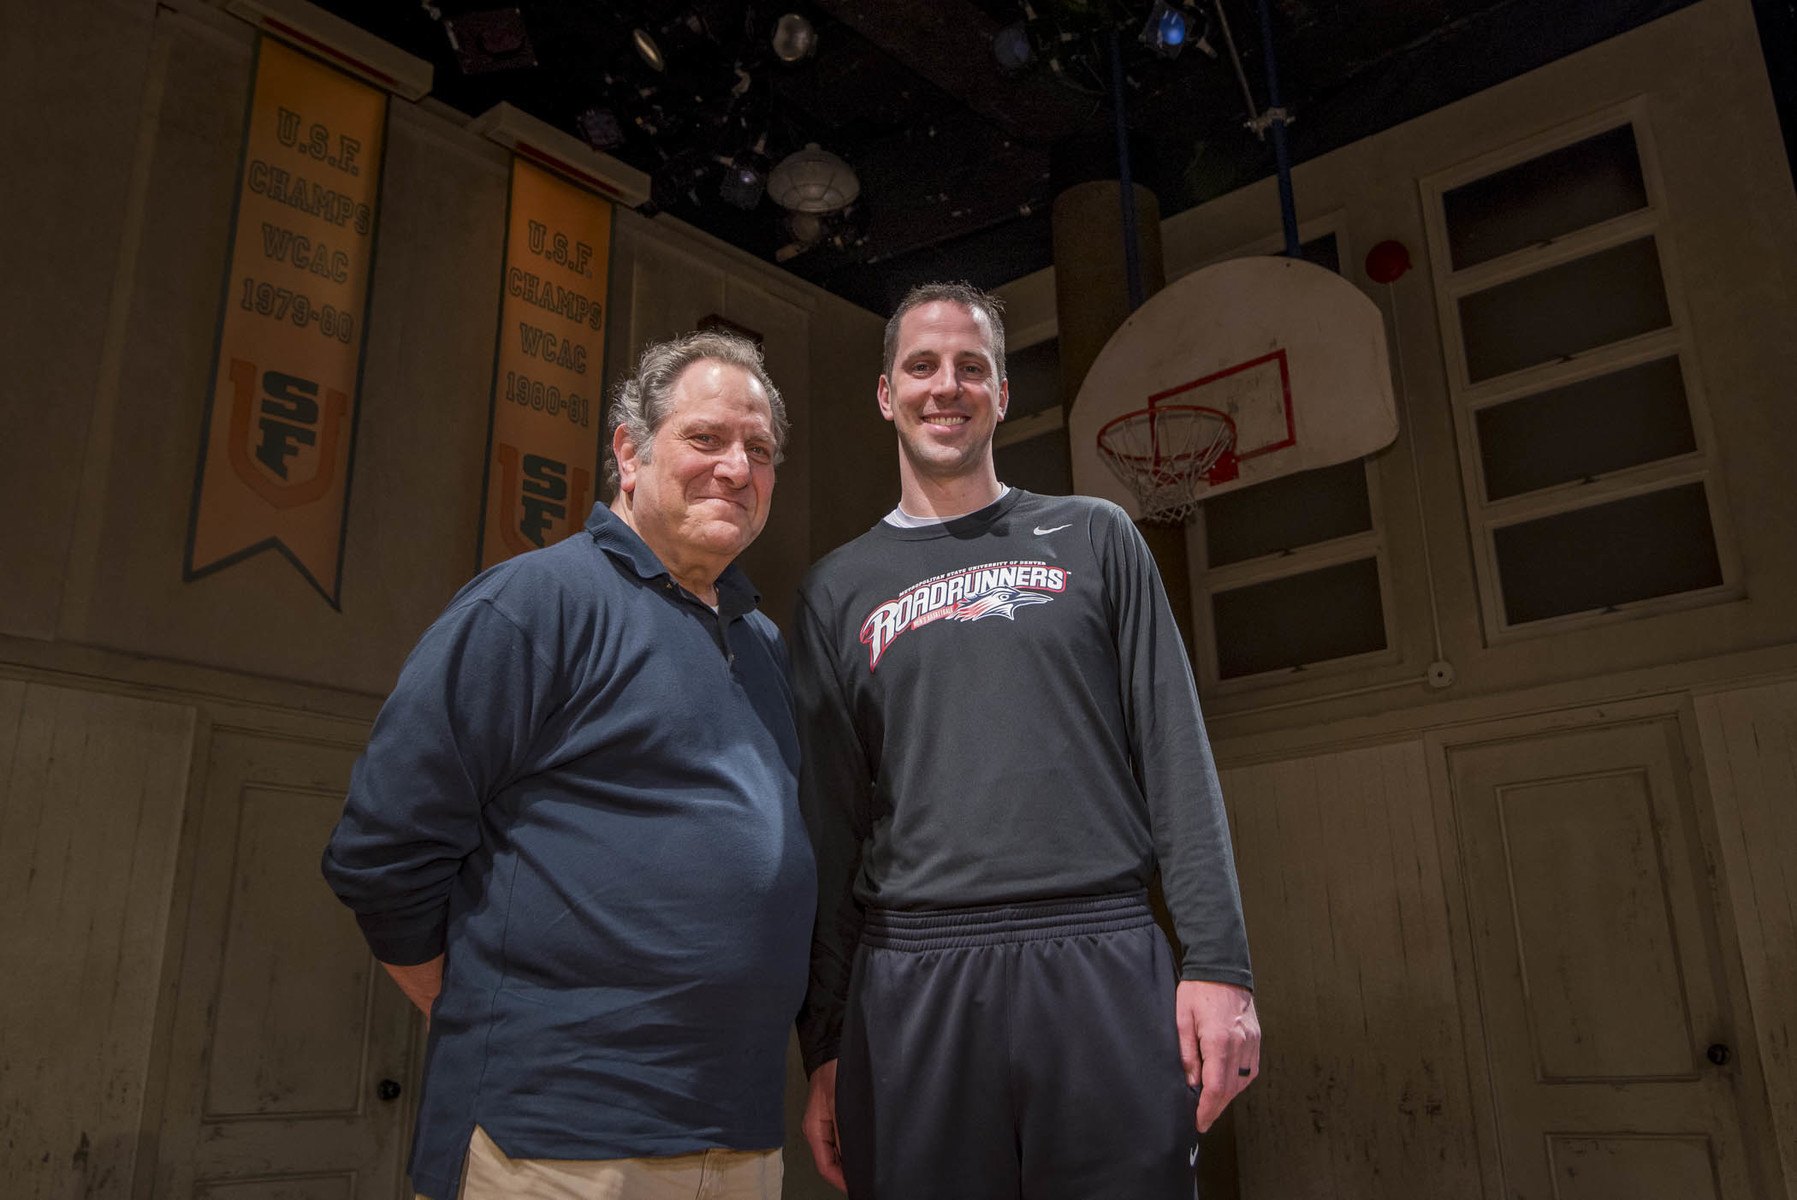 Acting head coach: Bahl lends expertise to theater